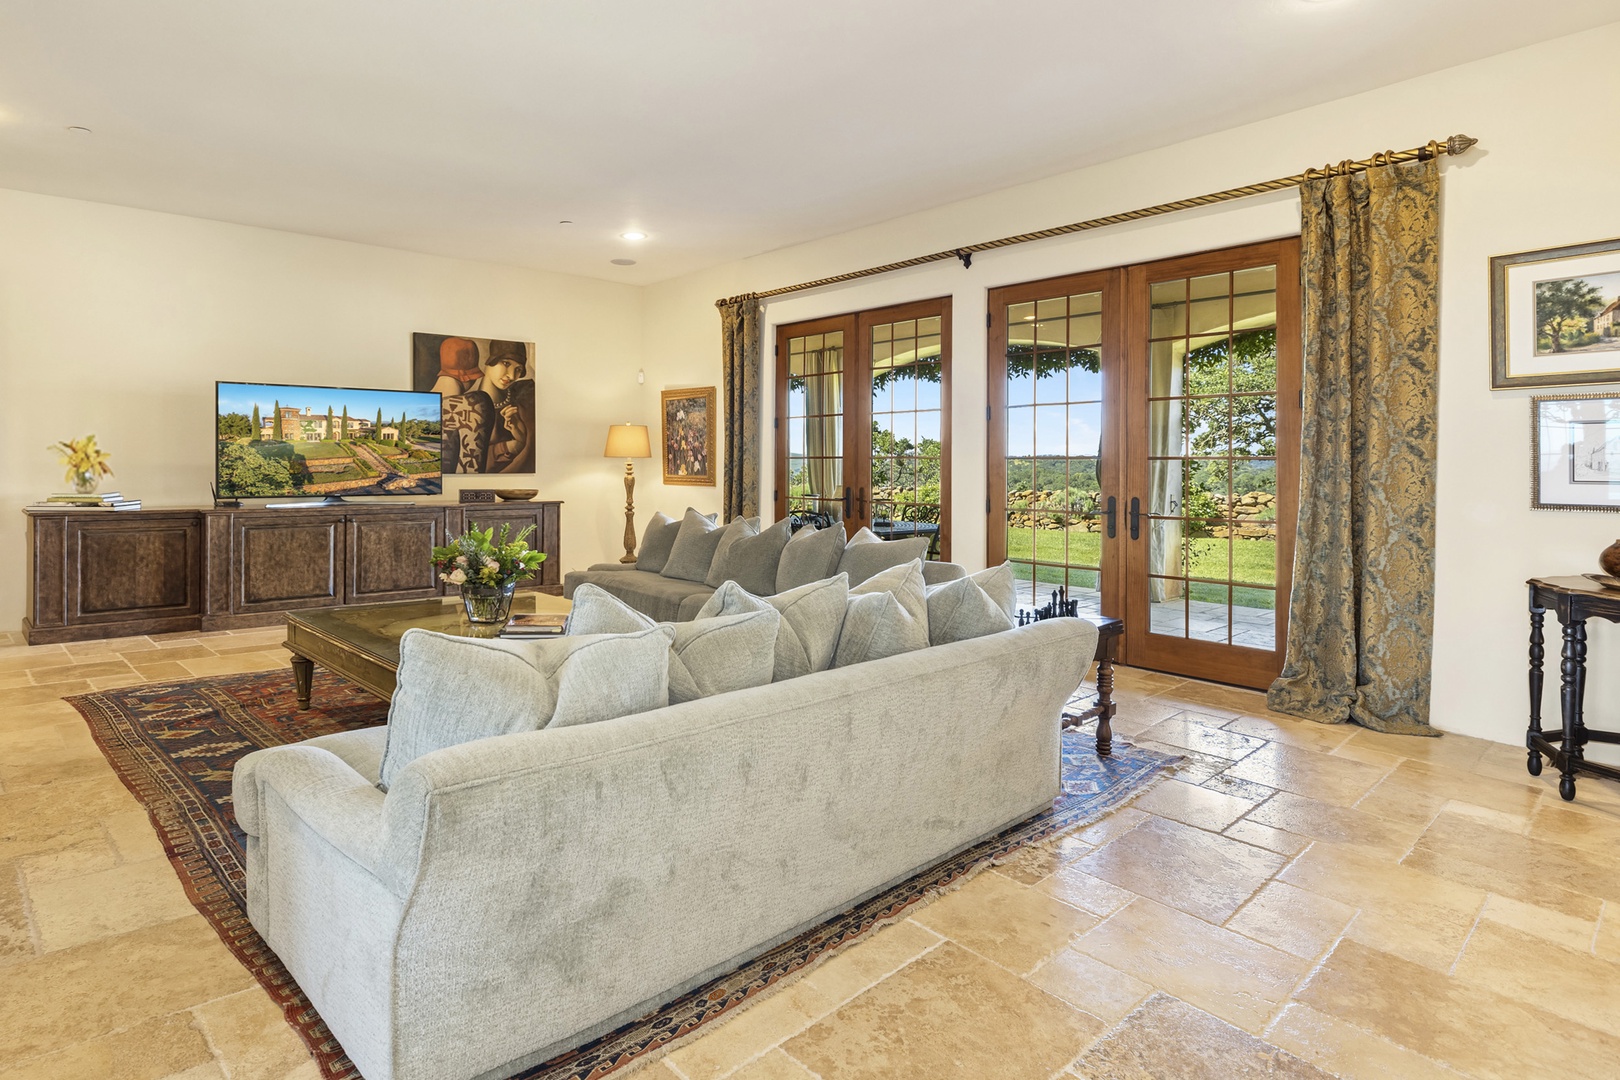 Fairfield Vacation Rentals, Villa Capricho - Open the French doors in the family room to access the spacious patio, where you can soak up the California sunshine while sipping on your favorite Suisun Valley wine